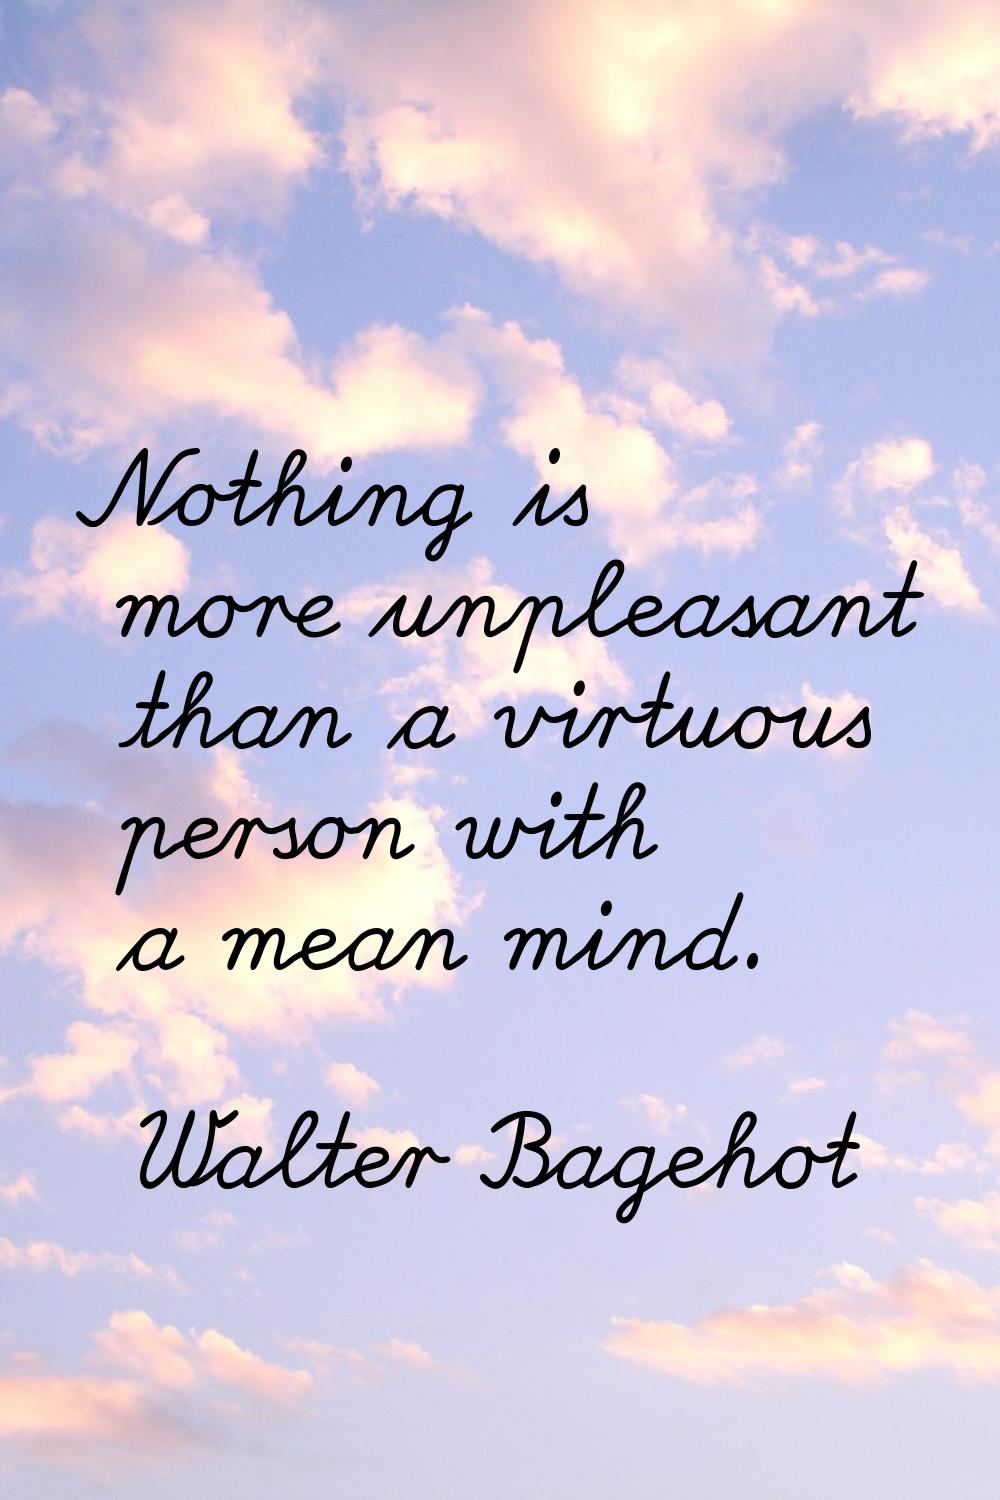 Nothing is more unpleasant than a virtuous person with a mean mind.